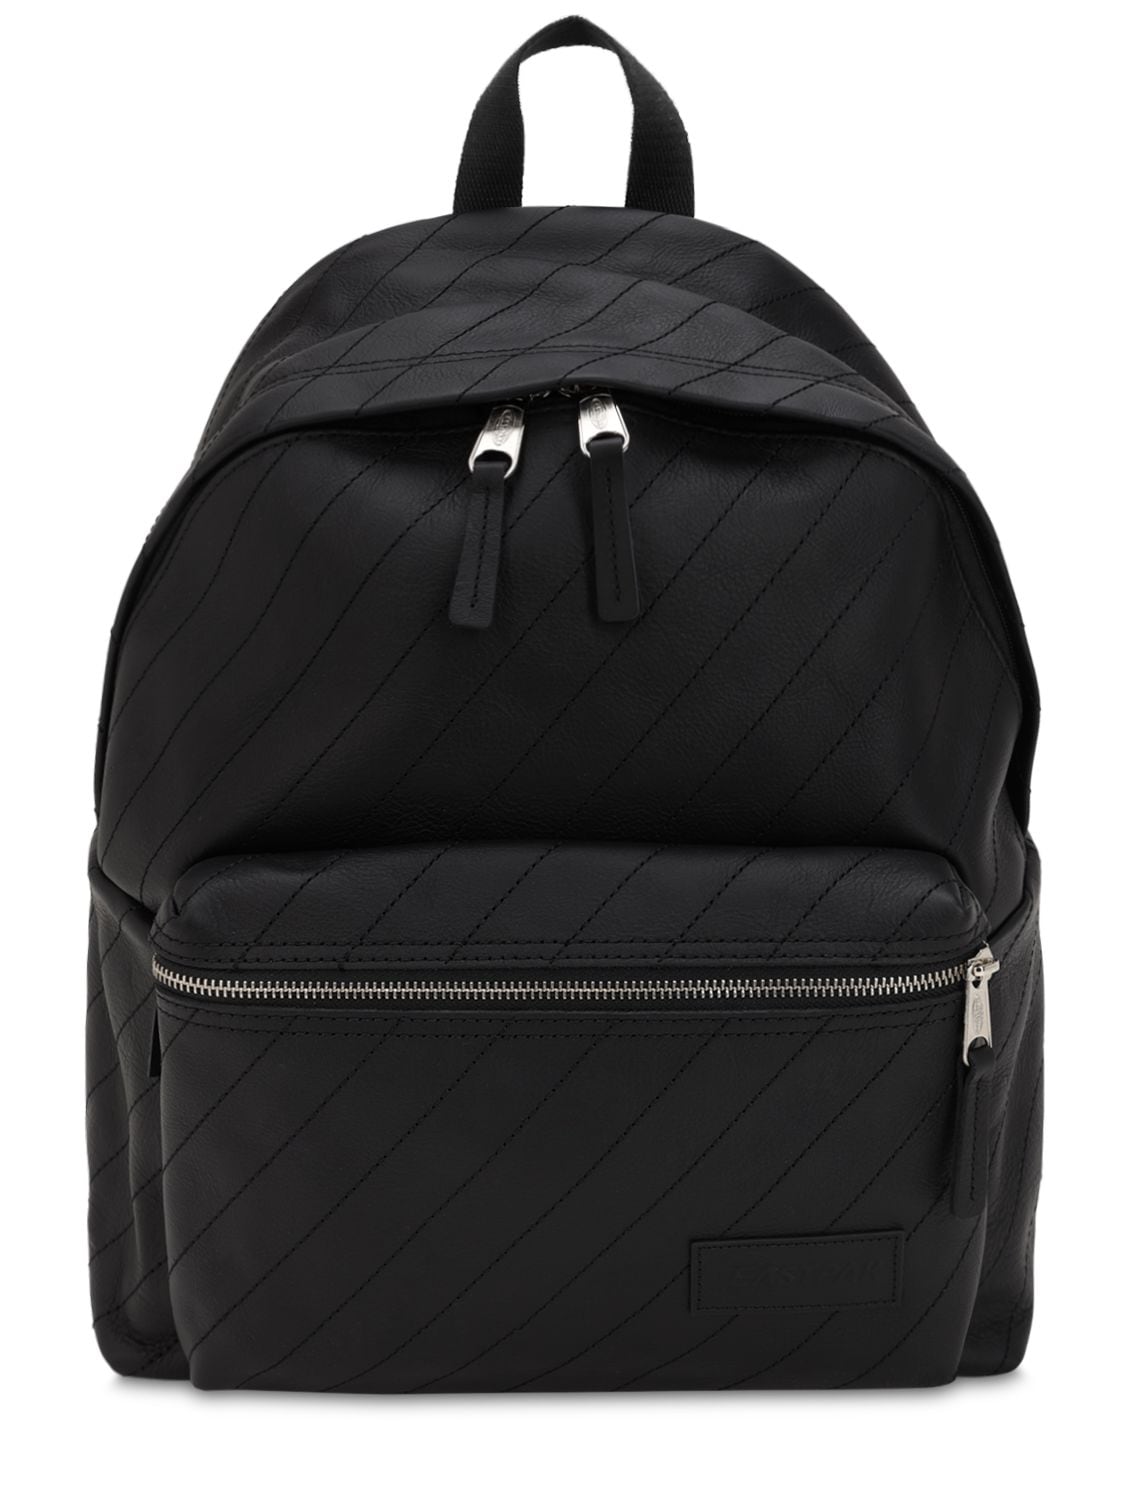 24l Pak'r Quilted Leather Backpack